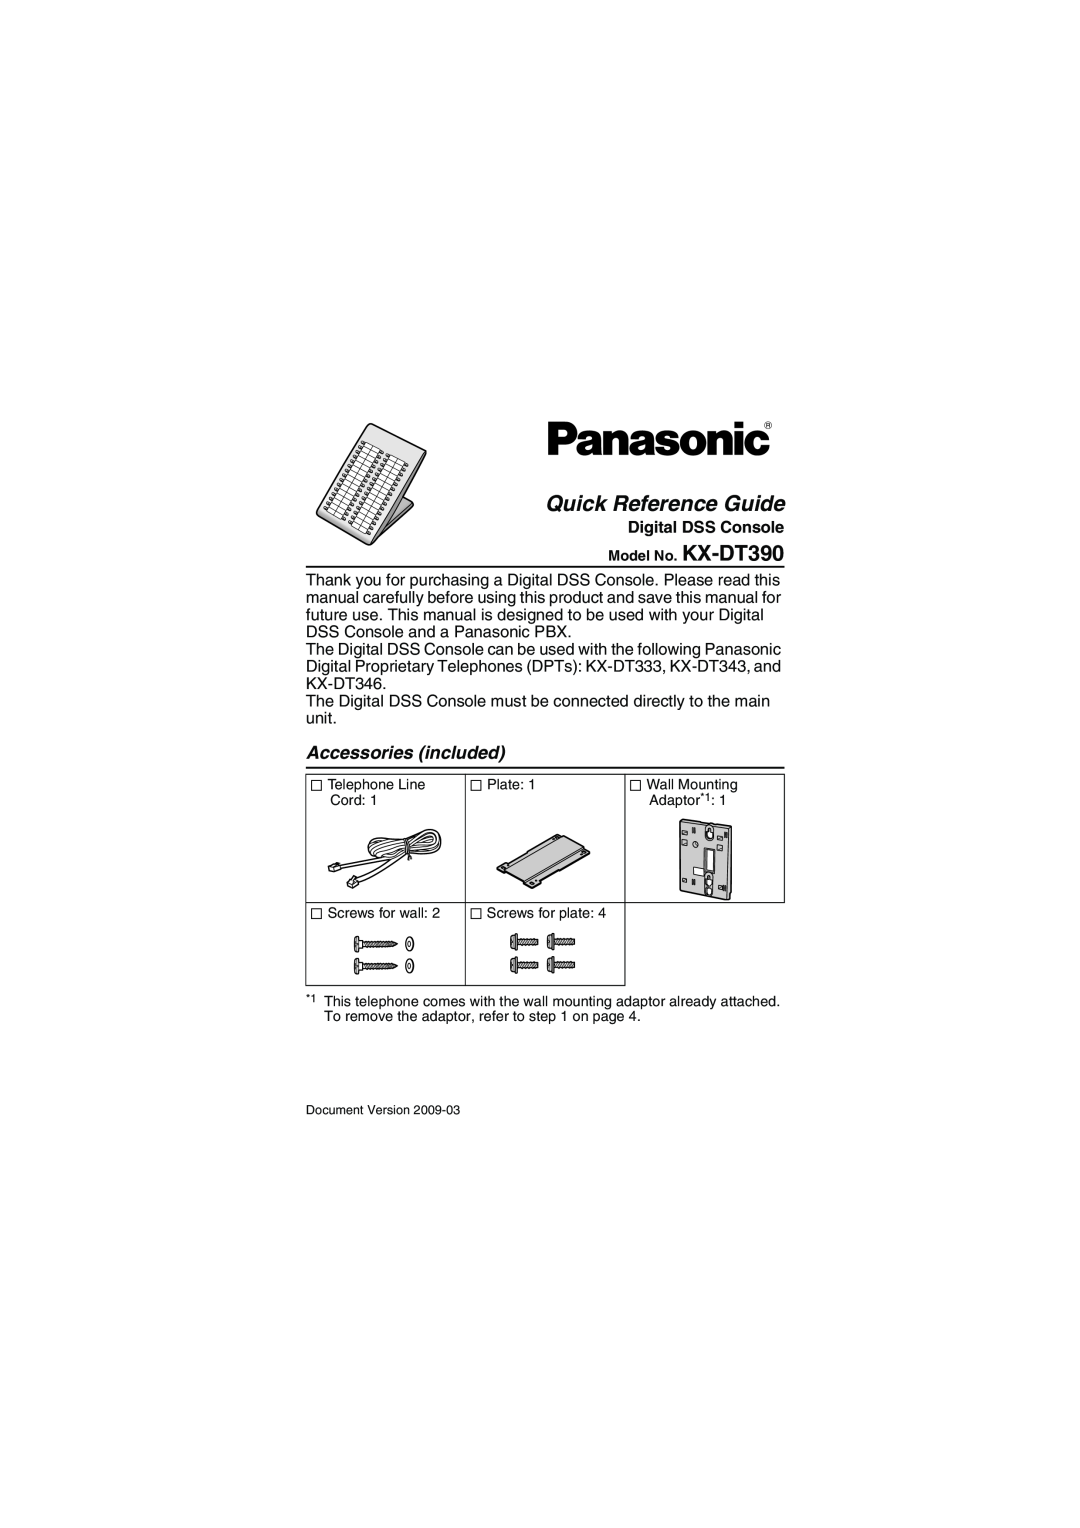 Panasonic KX-DT390 manual Accessories included, Digital DSS Console, Quick Reference Guide 